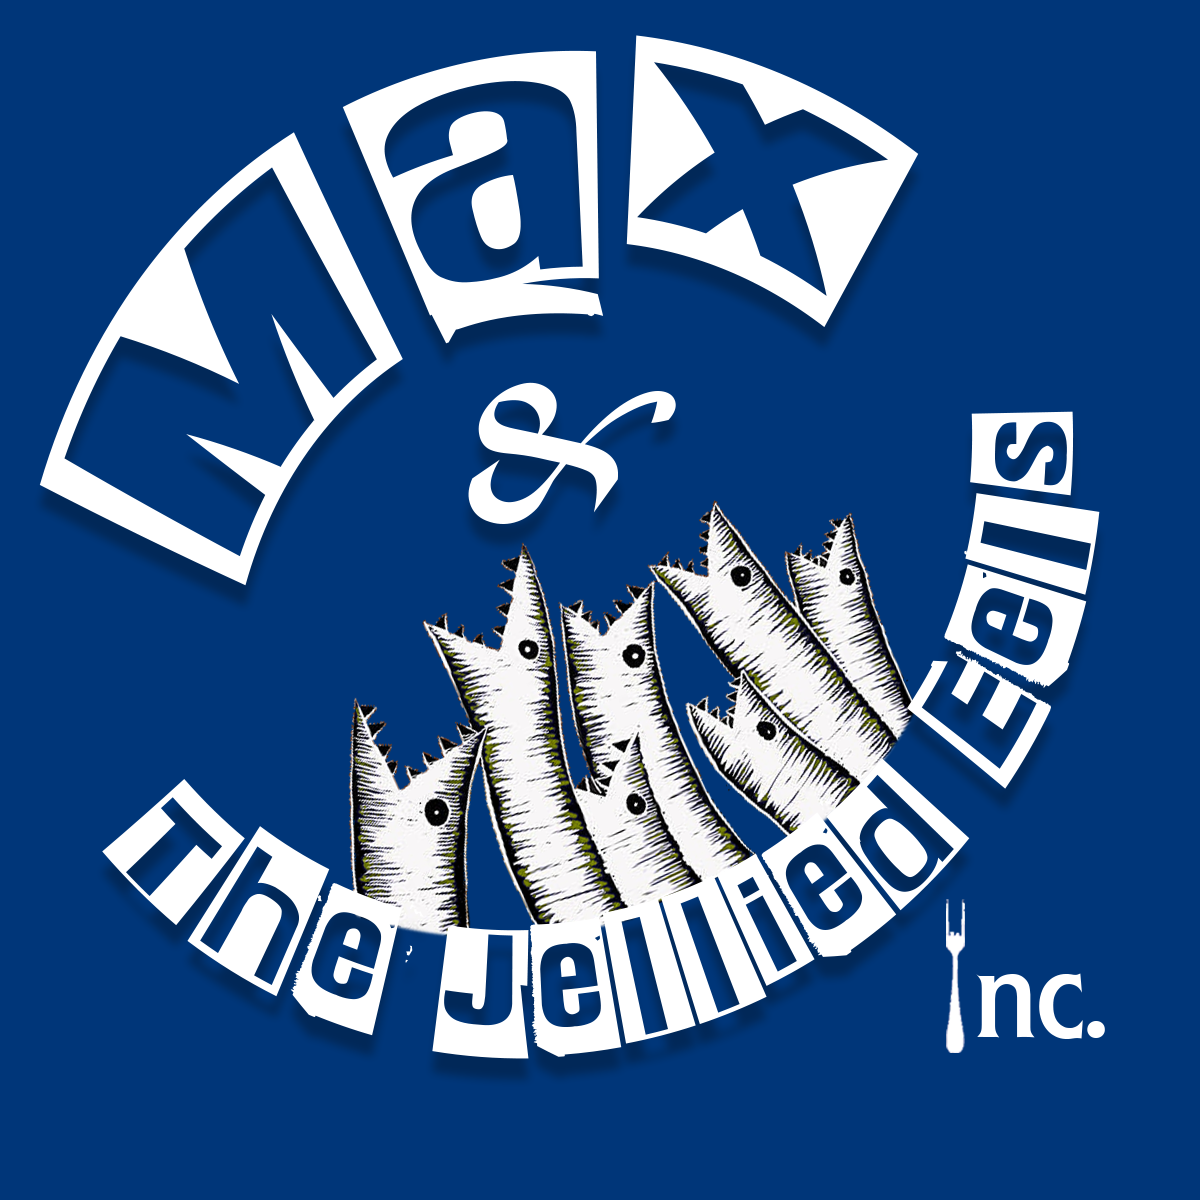 Max & the jellied eels inc.